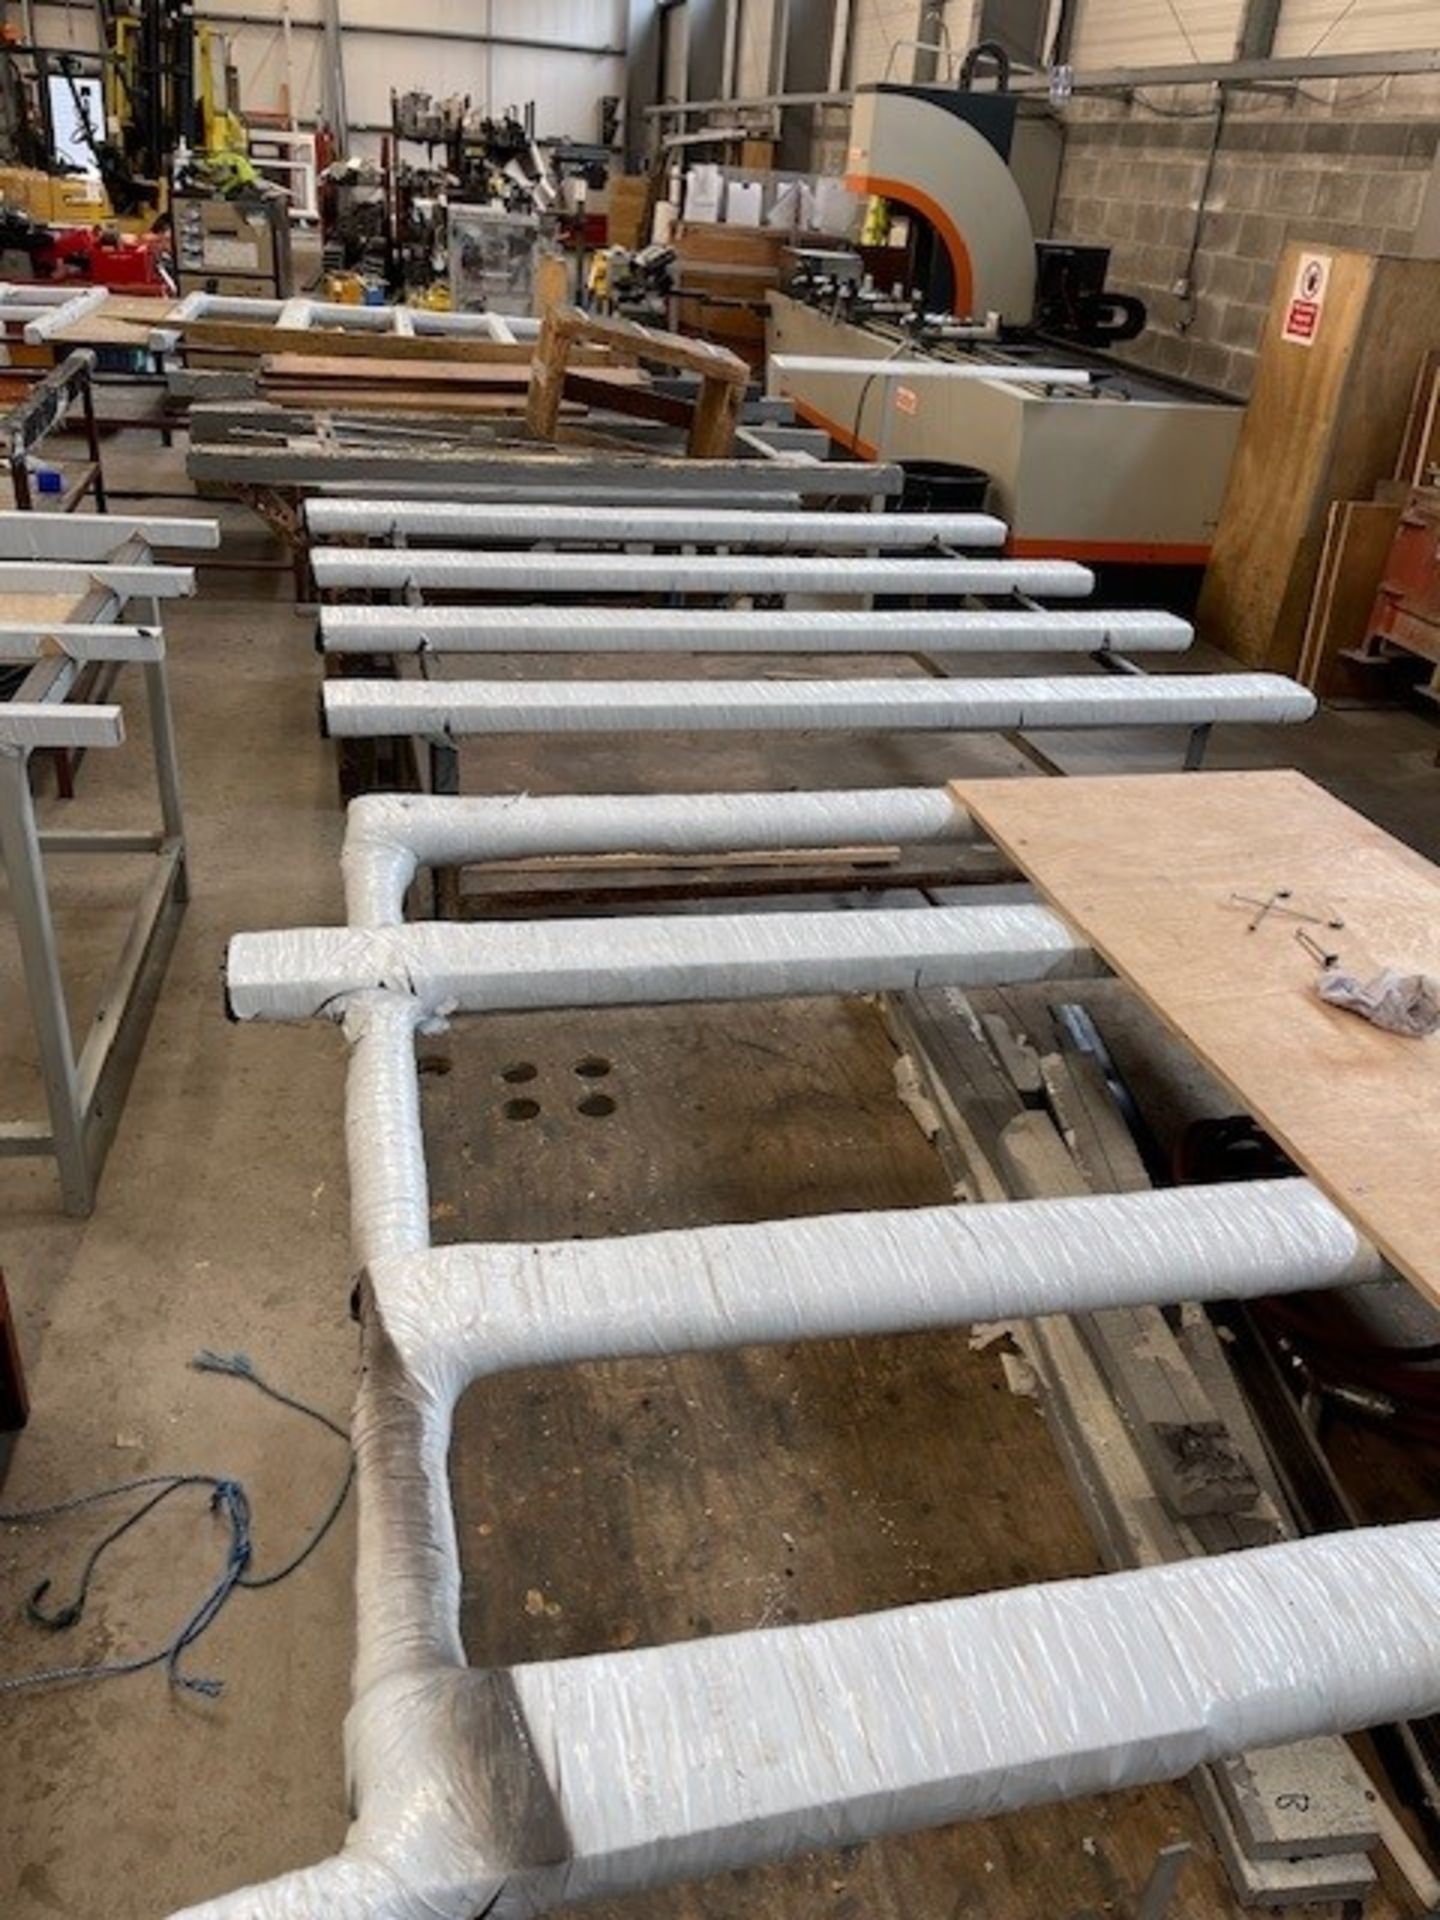 Five various steel frame workbenches